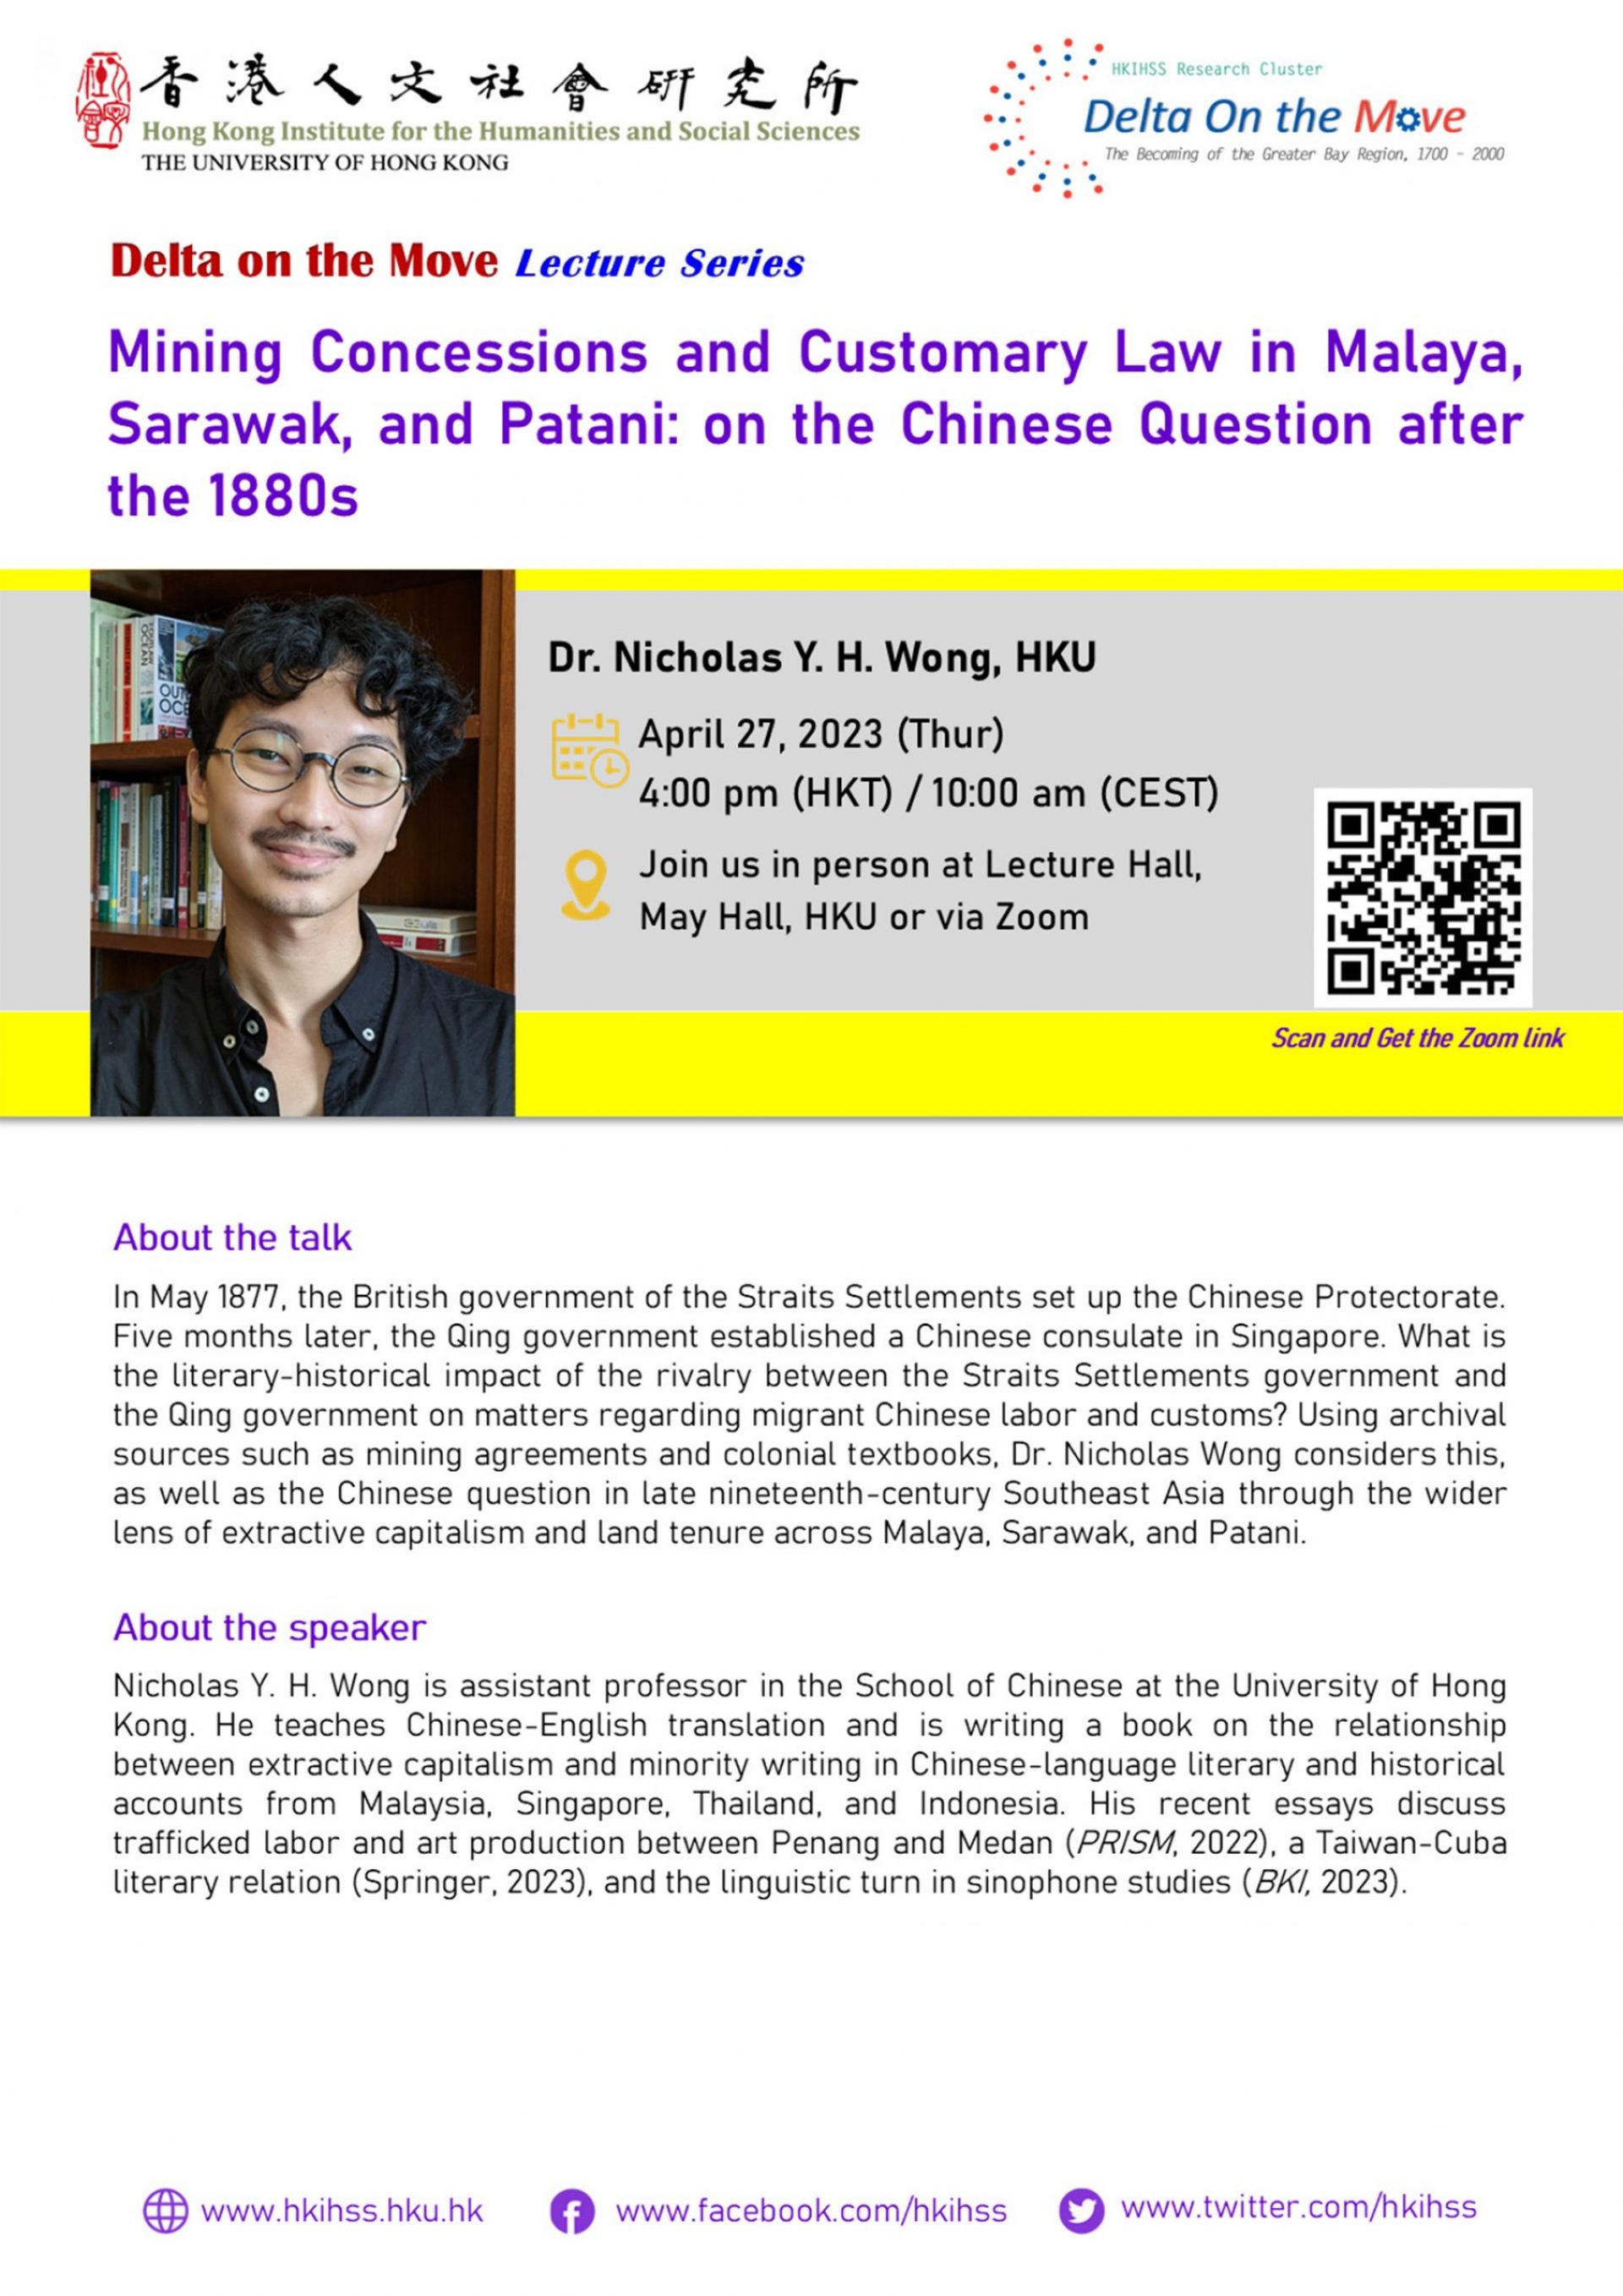 Delta on the Move Lecture Series “Mining concessions and customary law in Malaya, Sarawak, and Patani: on the Chinese question after the 1880s